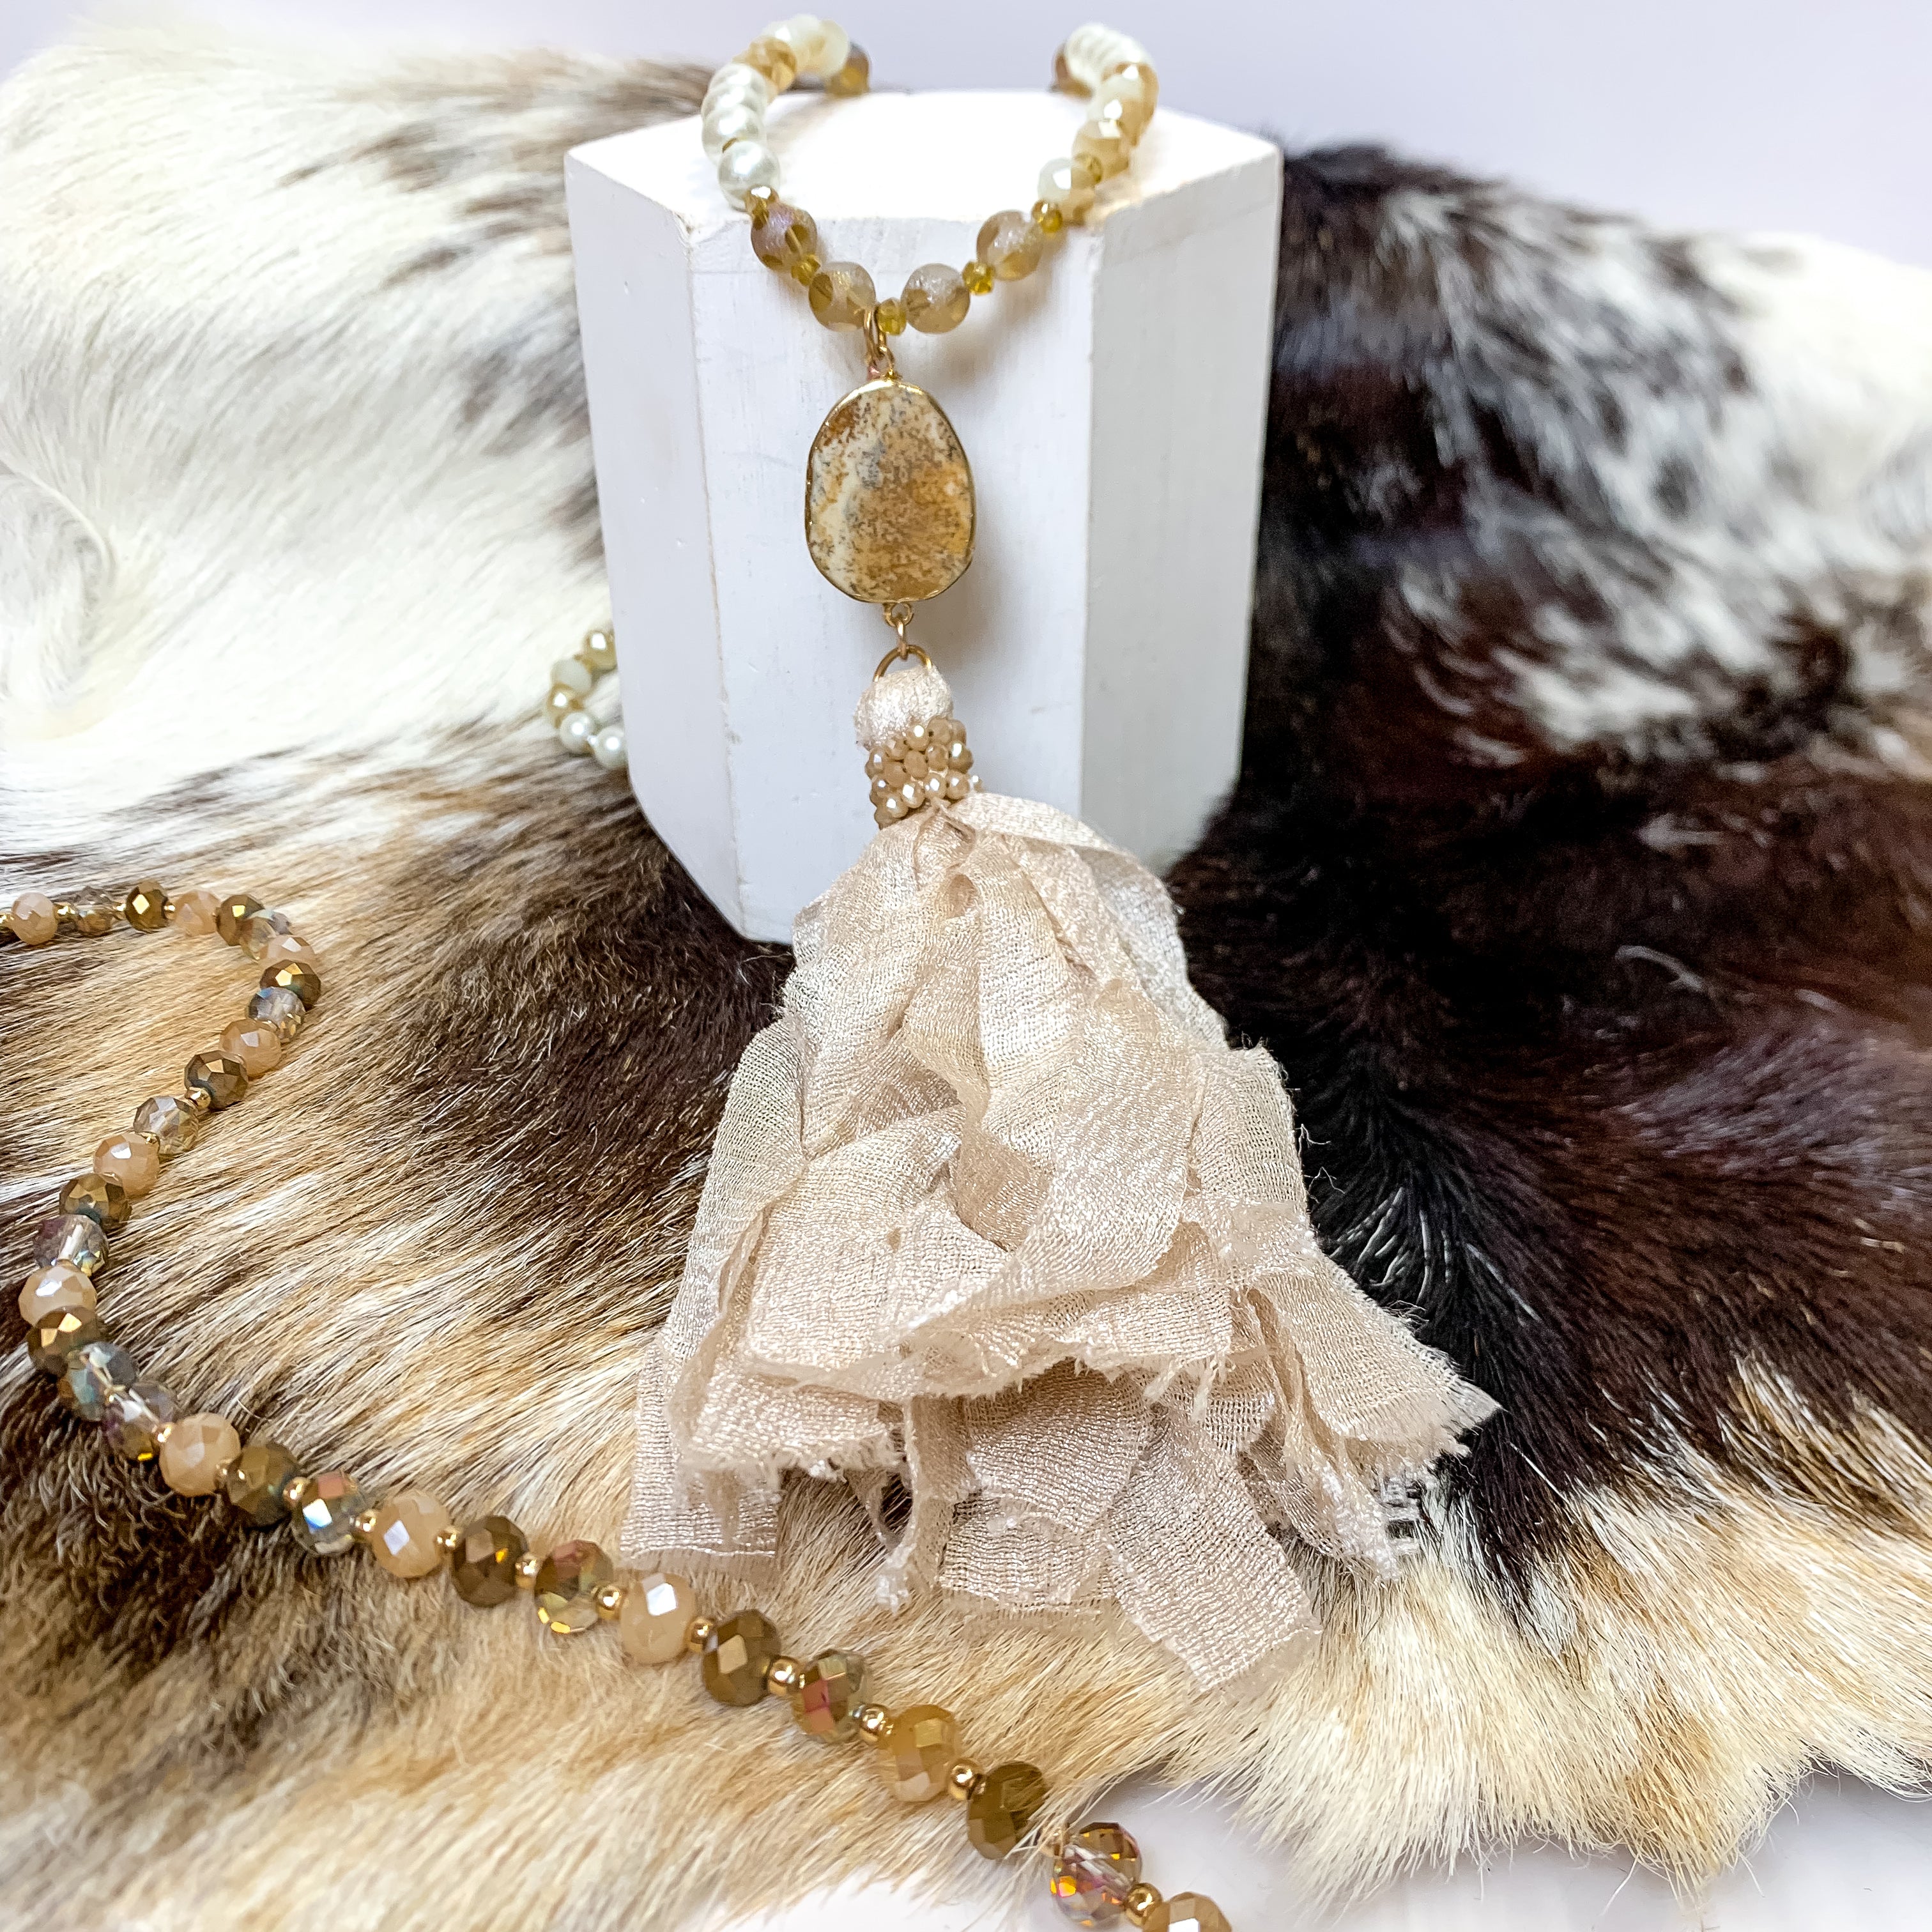 Crystal Beaded Necklace with Stone Slab Pendant and Tassel in Champagne Gold